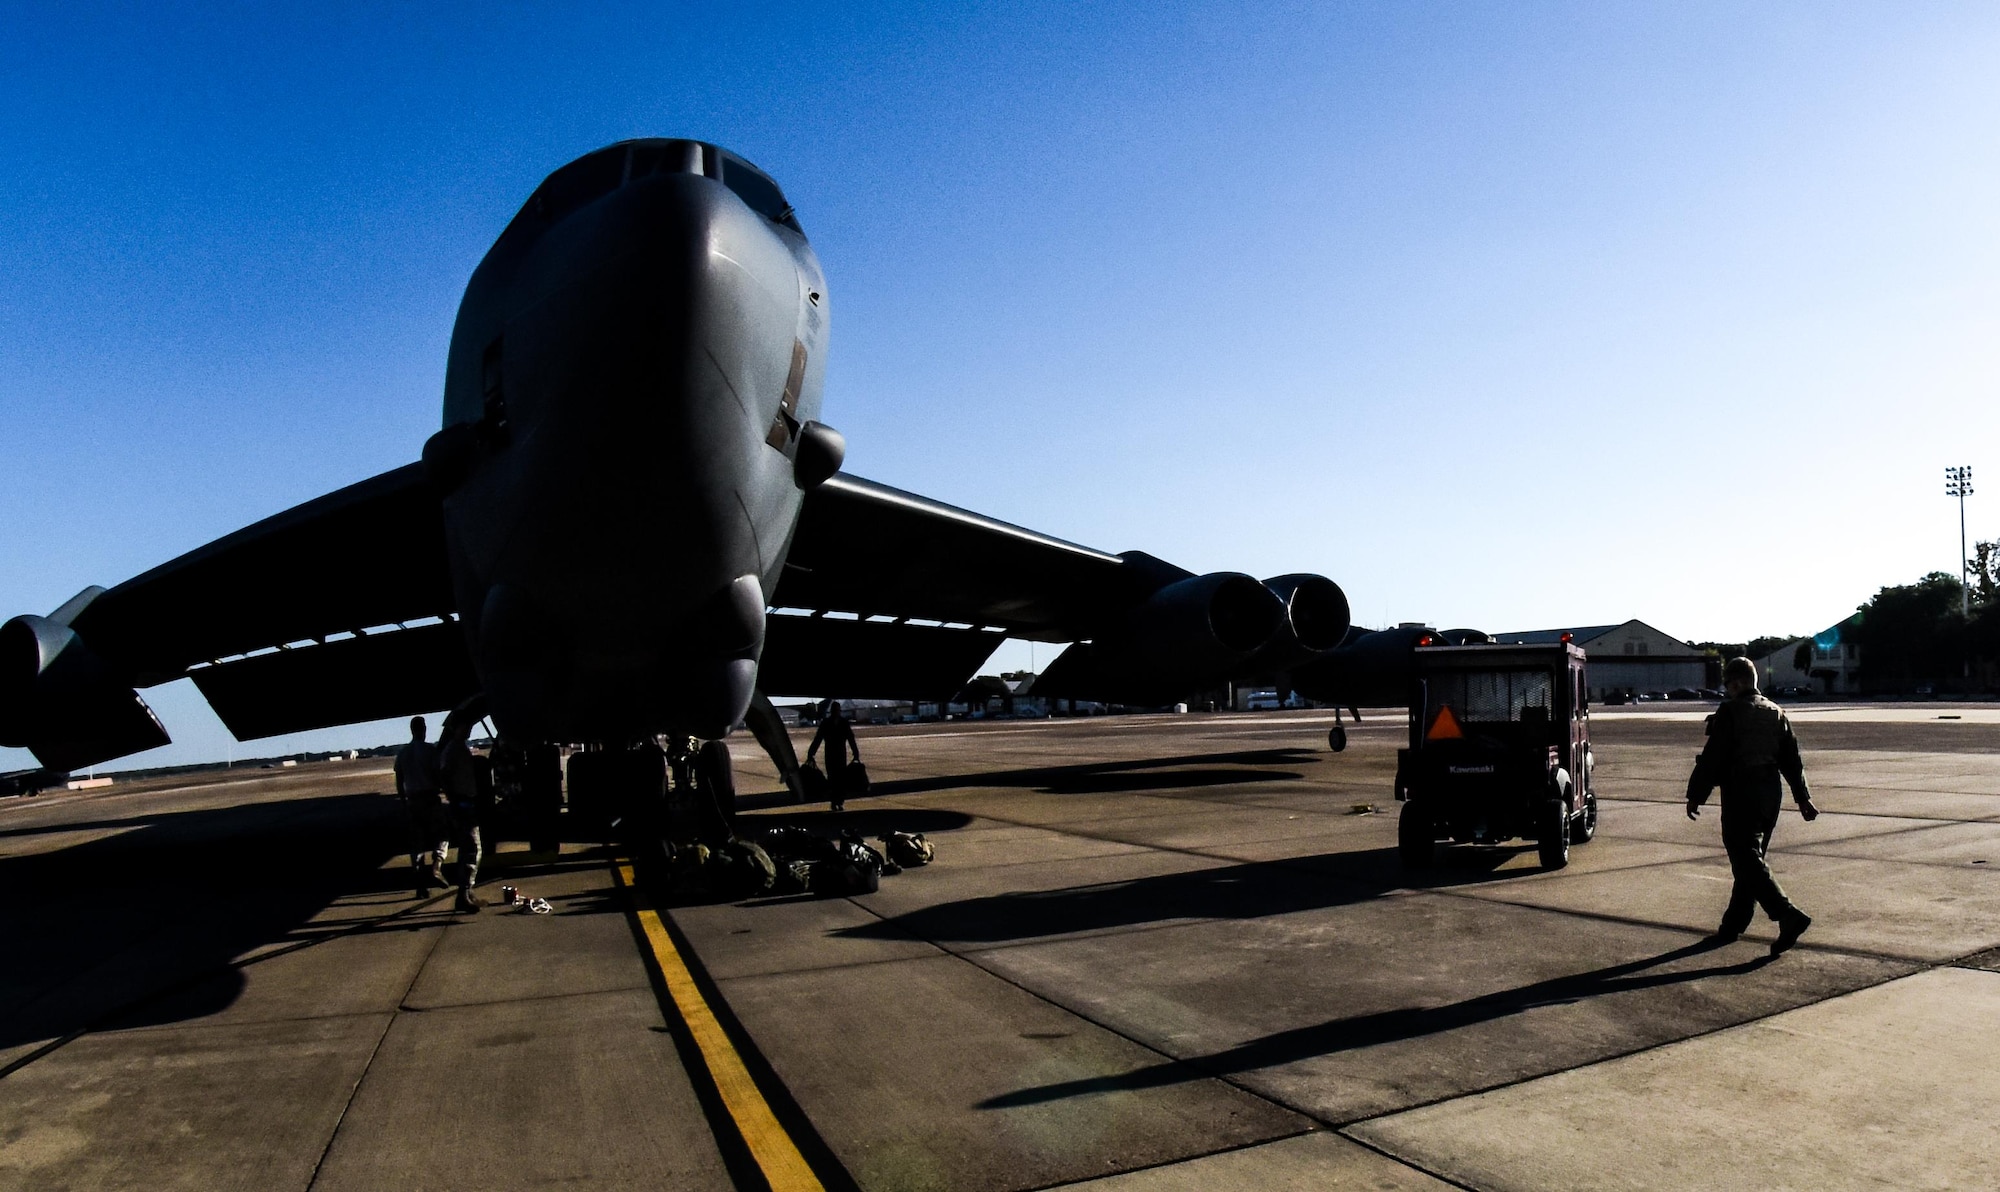 Aircrew unload their gear from a B-52 Stratofortress at Barksdale Air Force Base, La., Oct. 30, 2016, after supporting U.S. Strategic Command exercise Global Thunder 17. USSTRATCOM’s fundamental mission is to deter strategic attack, which is an existential threat to the U.S. and its allies. Testing readiness ensures the preservation a safe, secure, effective and ready strategic deterrent force. (U.S. Air Force photo/Senior Airman Luke Hill)